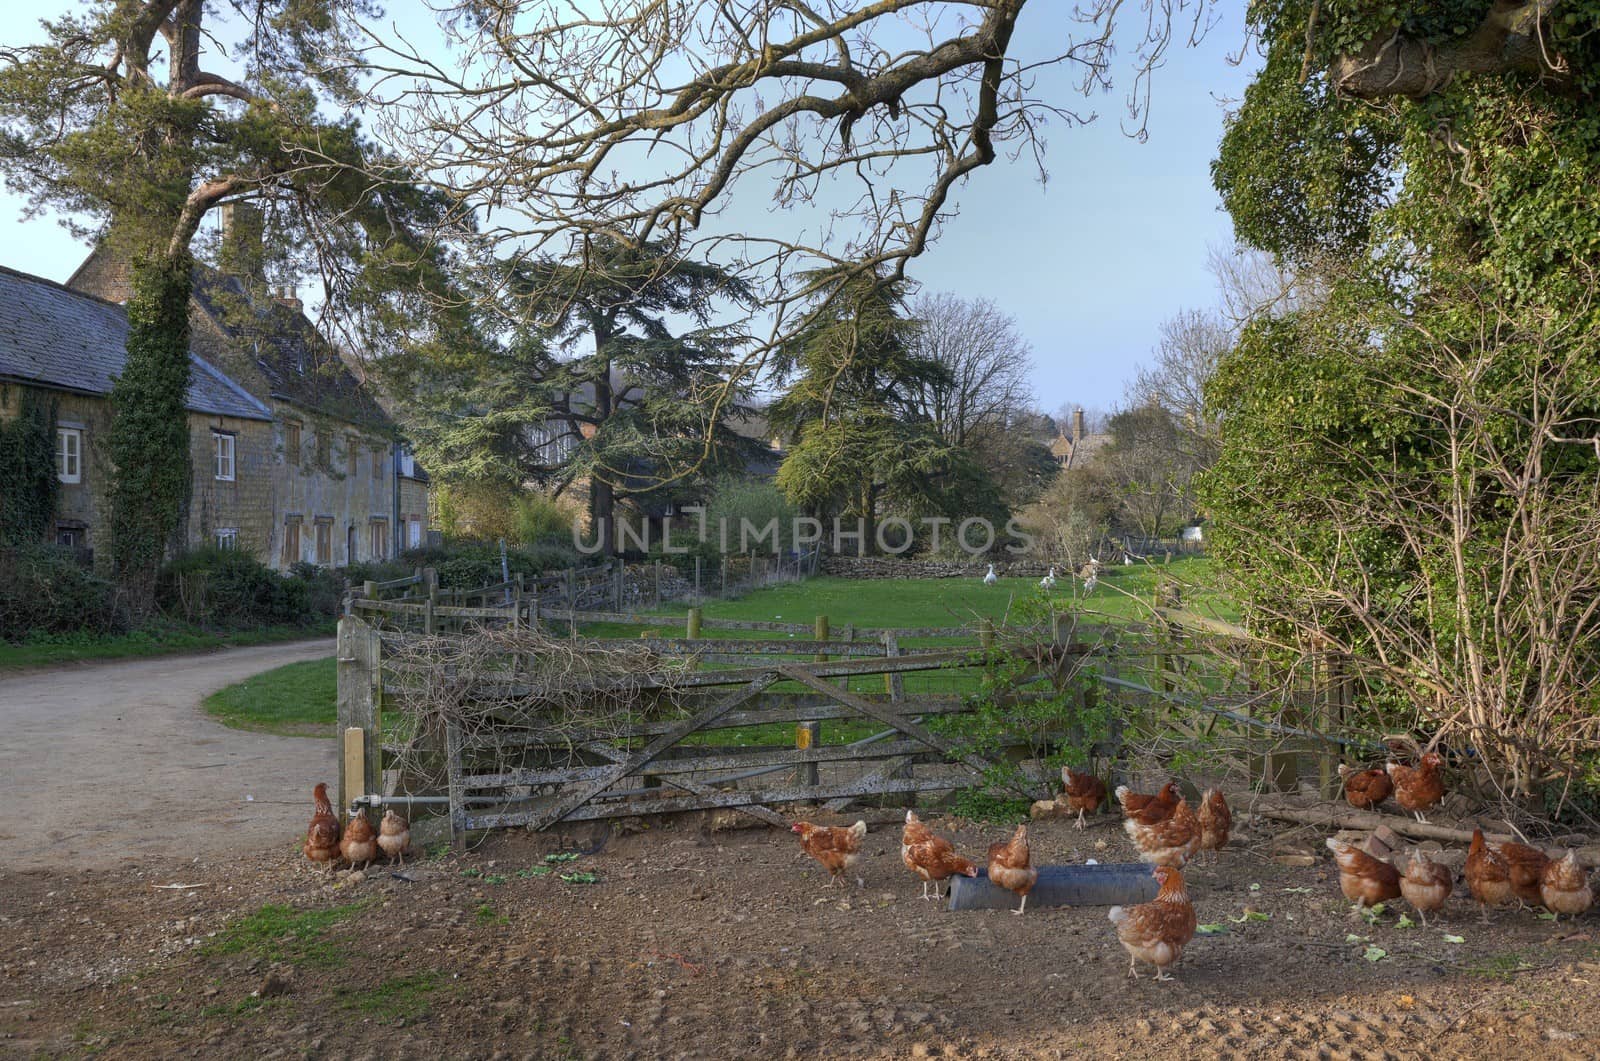 English rural scene with farm, chickens and geese, Hidcote Bartrim, Gloucestershire, England.